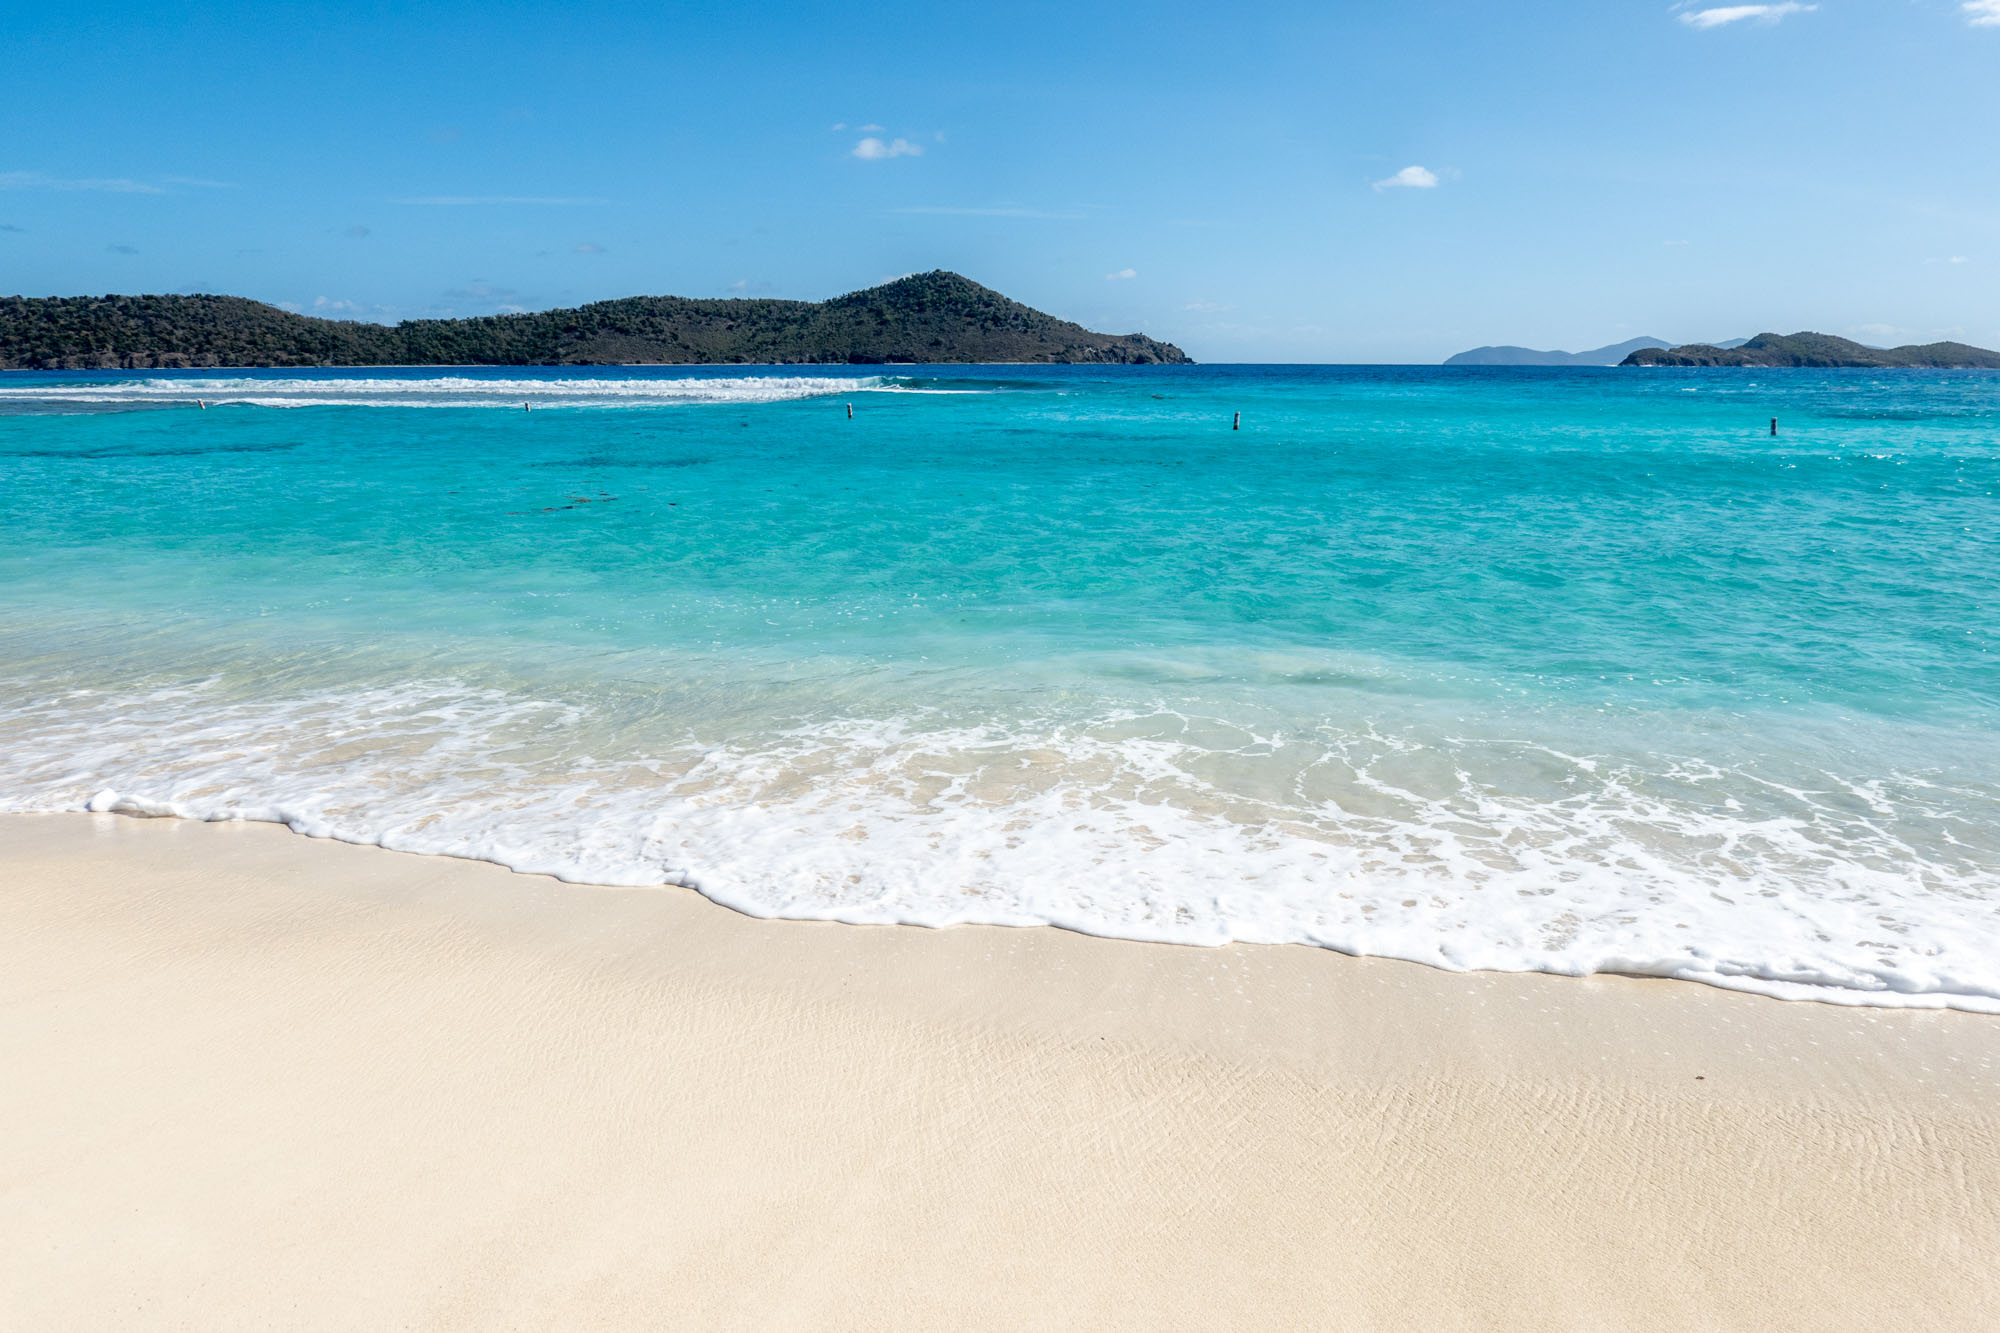 Blue ocean water and a white sand beach with hilly islands in the distance in St. Thomas